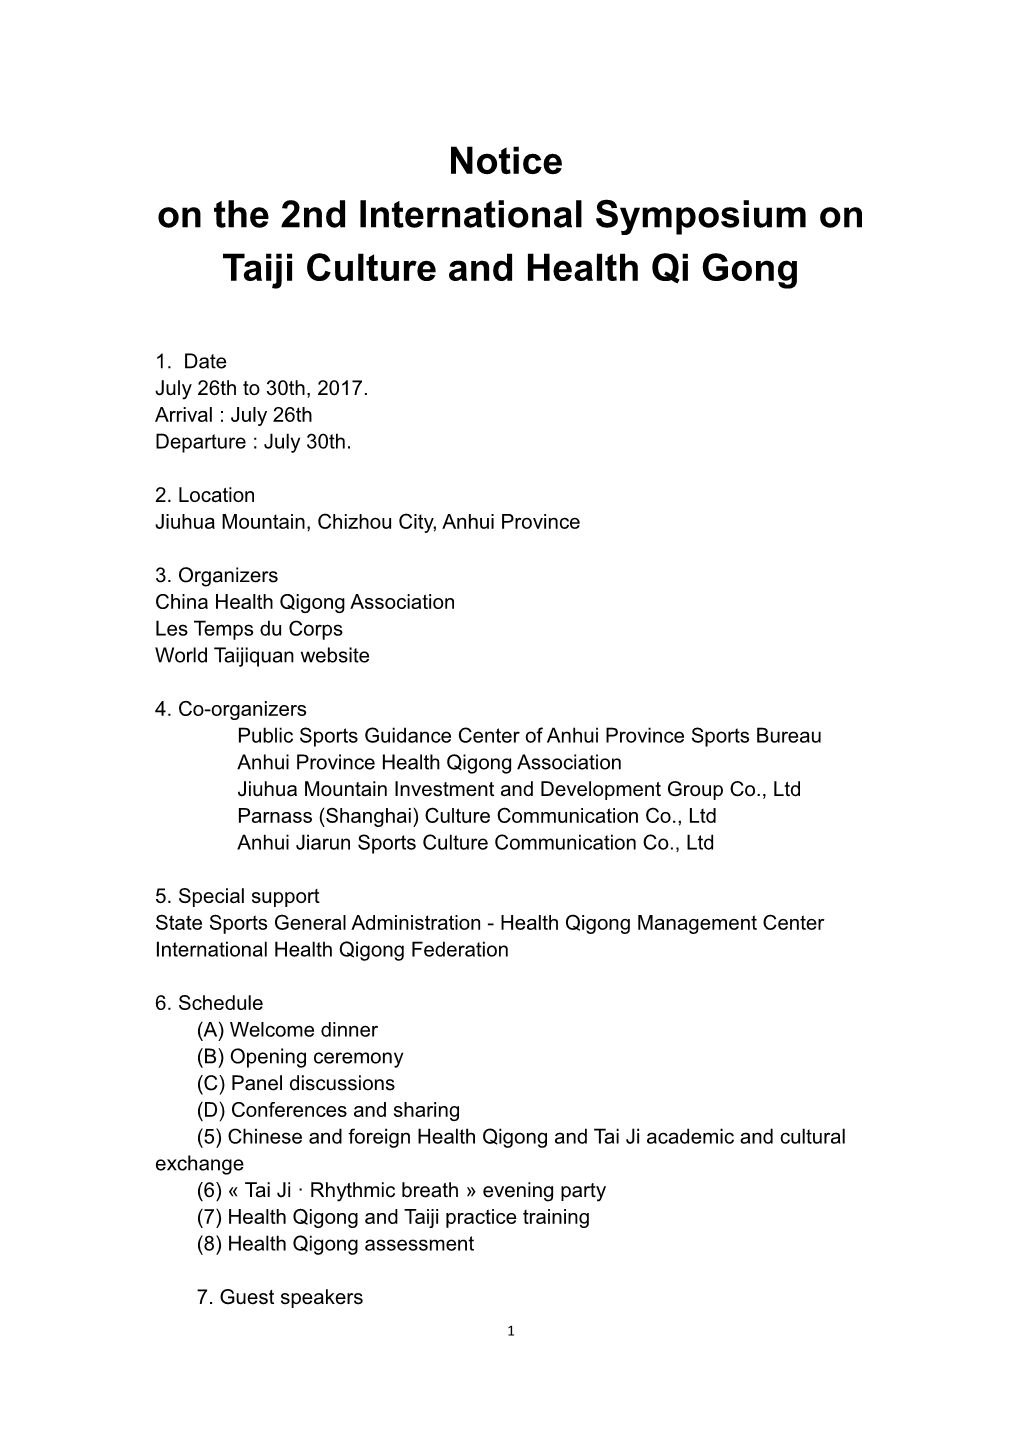 On the 2Nd International Symposium on Taiji Culture and Health Qi Gong